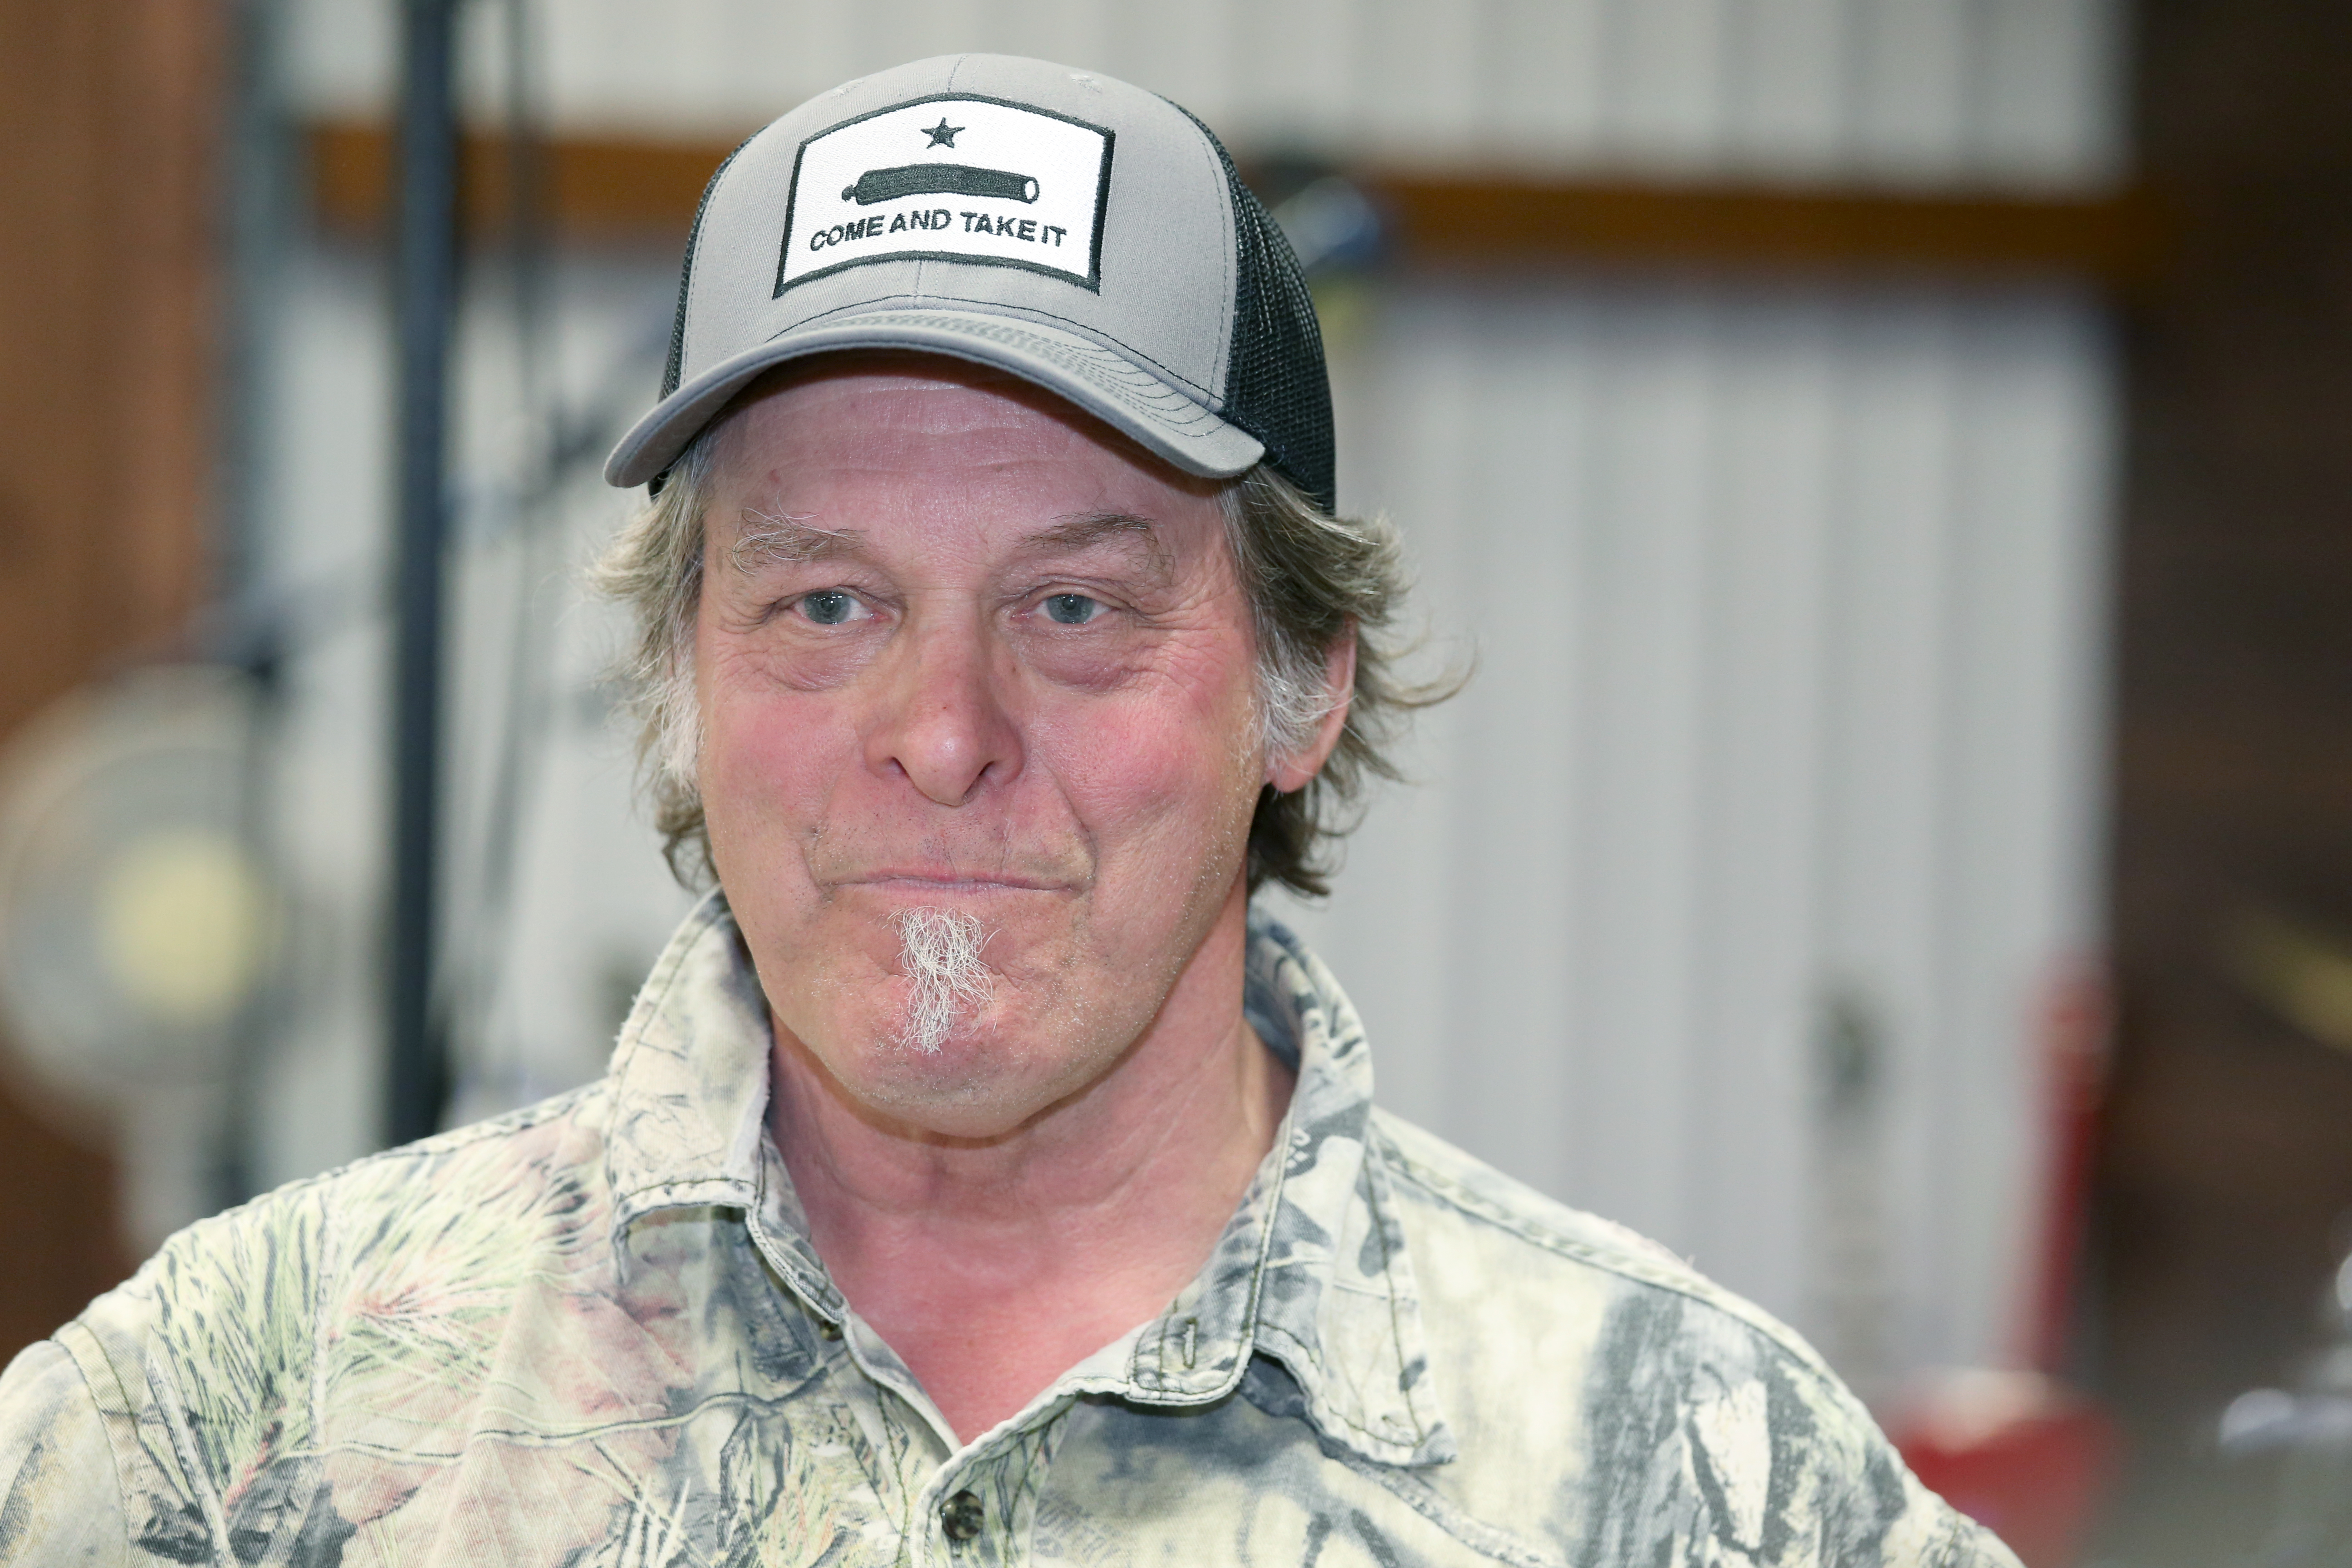 Ted Nugent au Tucker Hall le 26 mars 2021 à Waco, Texas | Source : Getty Images